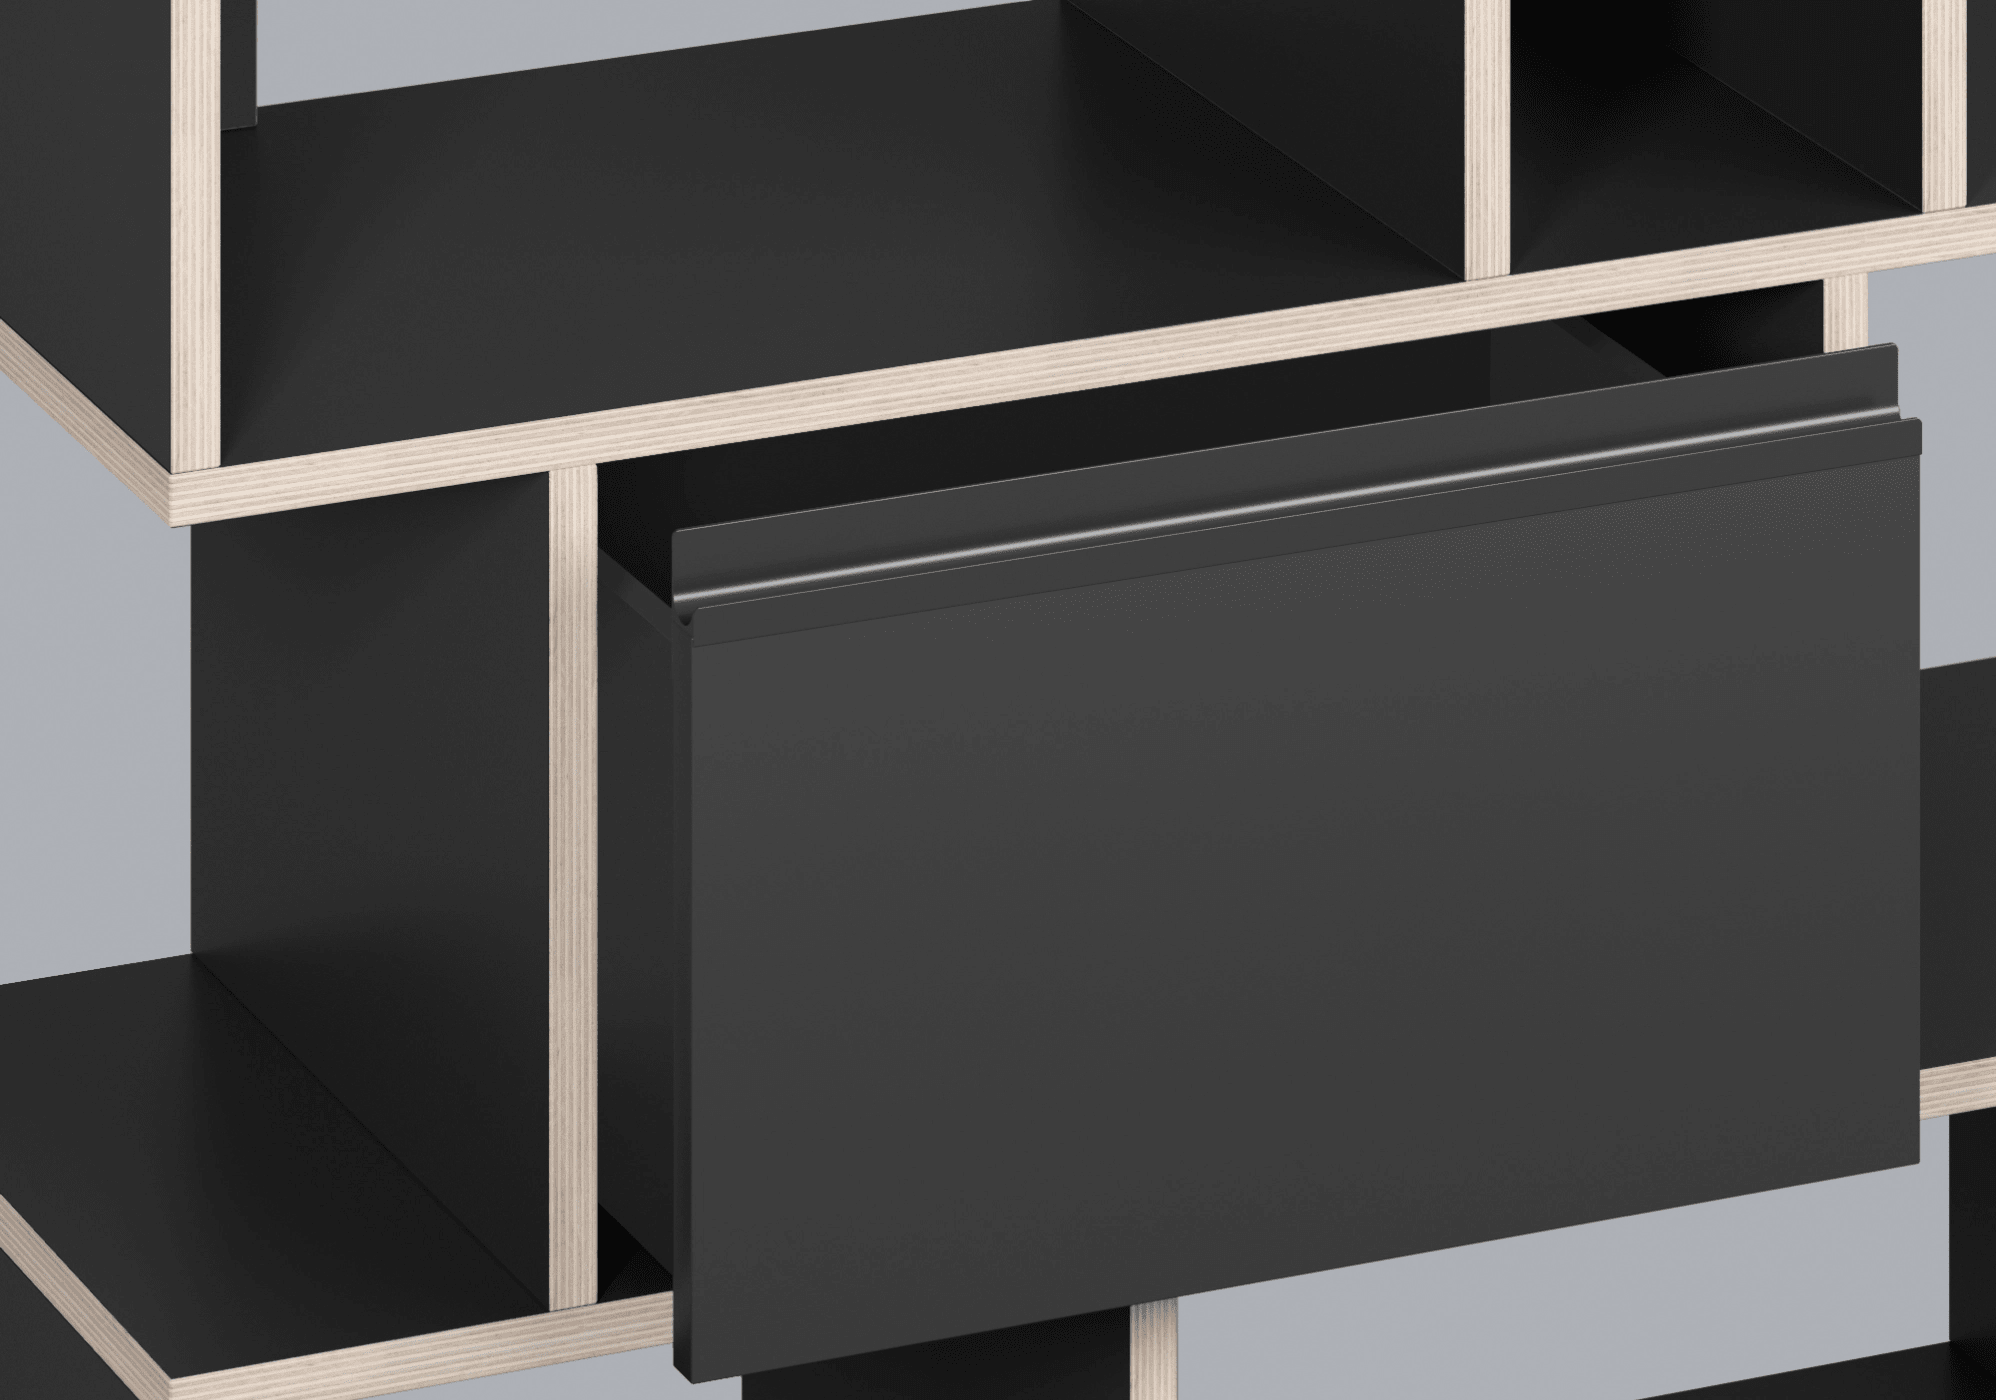 Large Black Plywood Shoe Rack with Doors, Drawers and Backpanels plywood - 390x63x32cm 8